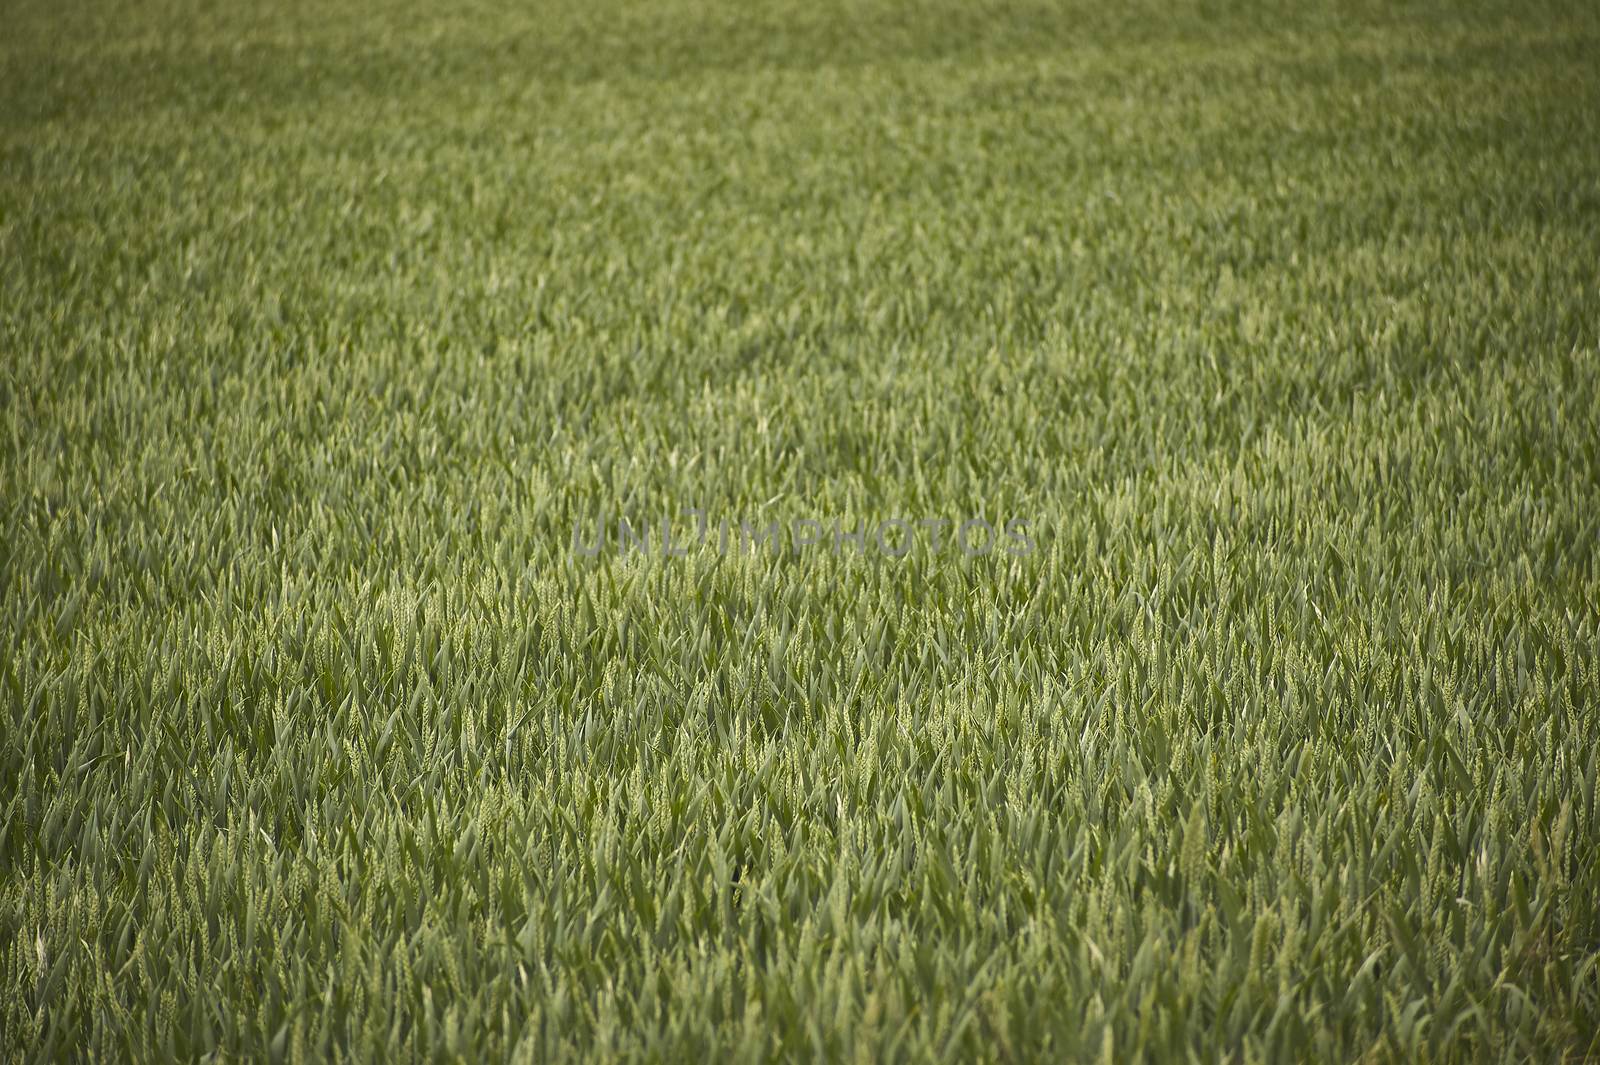 Field of barley cultivation by pippocarlot